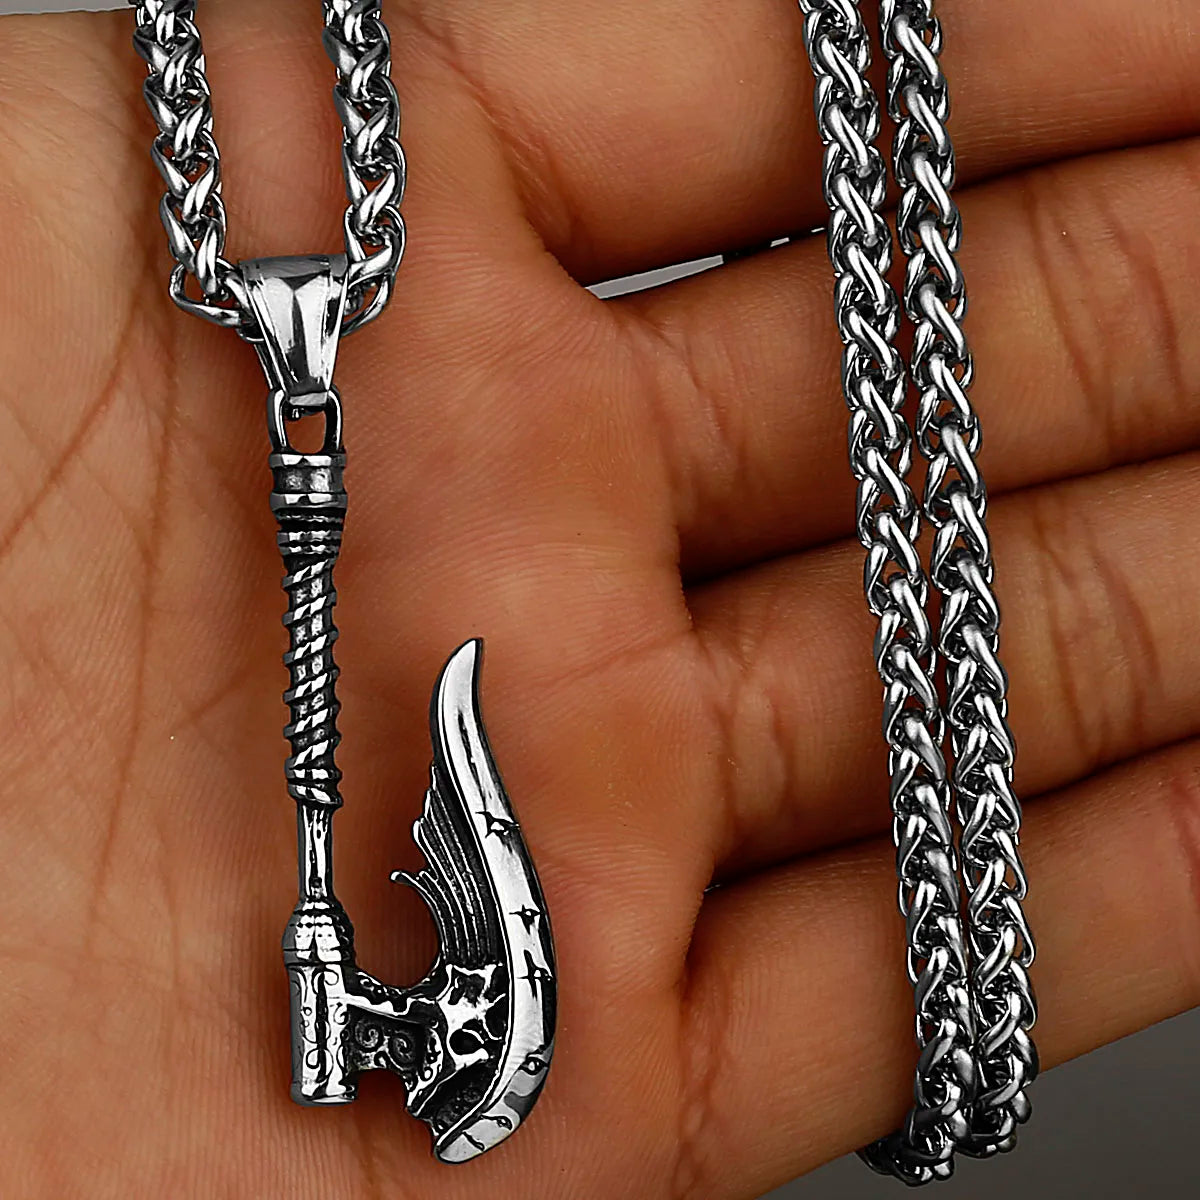 Viking Axe Necklace Pendant - Mythical Pieces Only Pendant / WJ 73